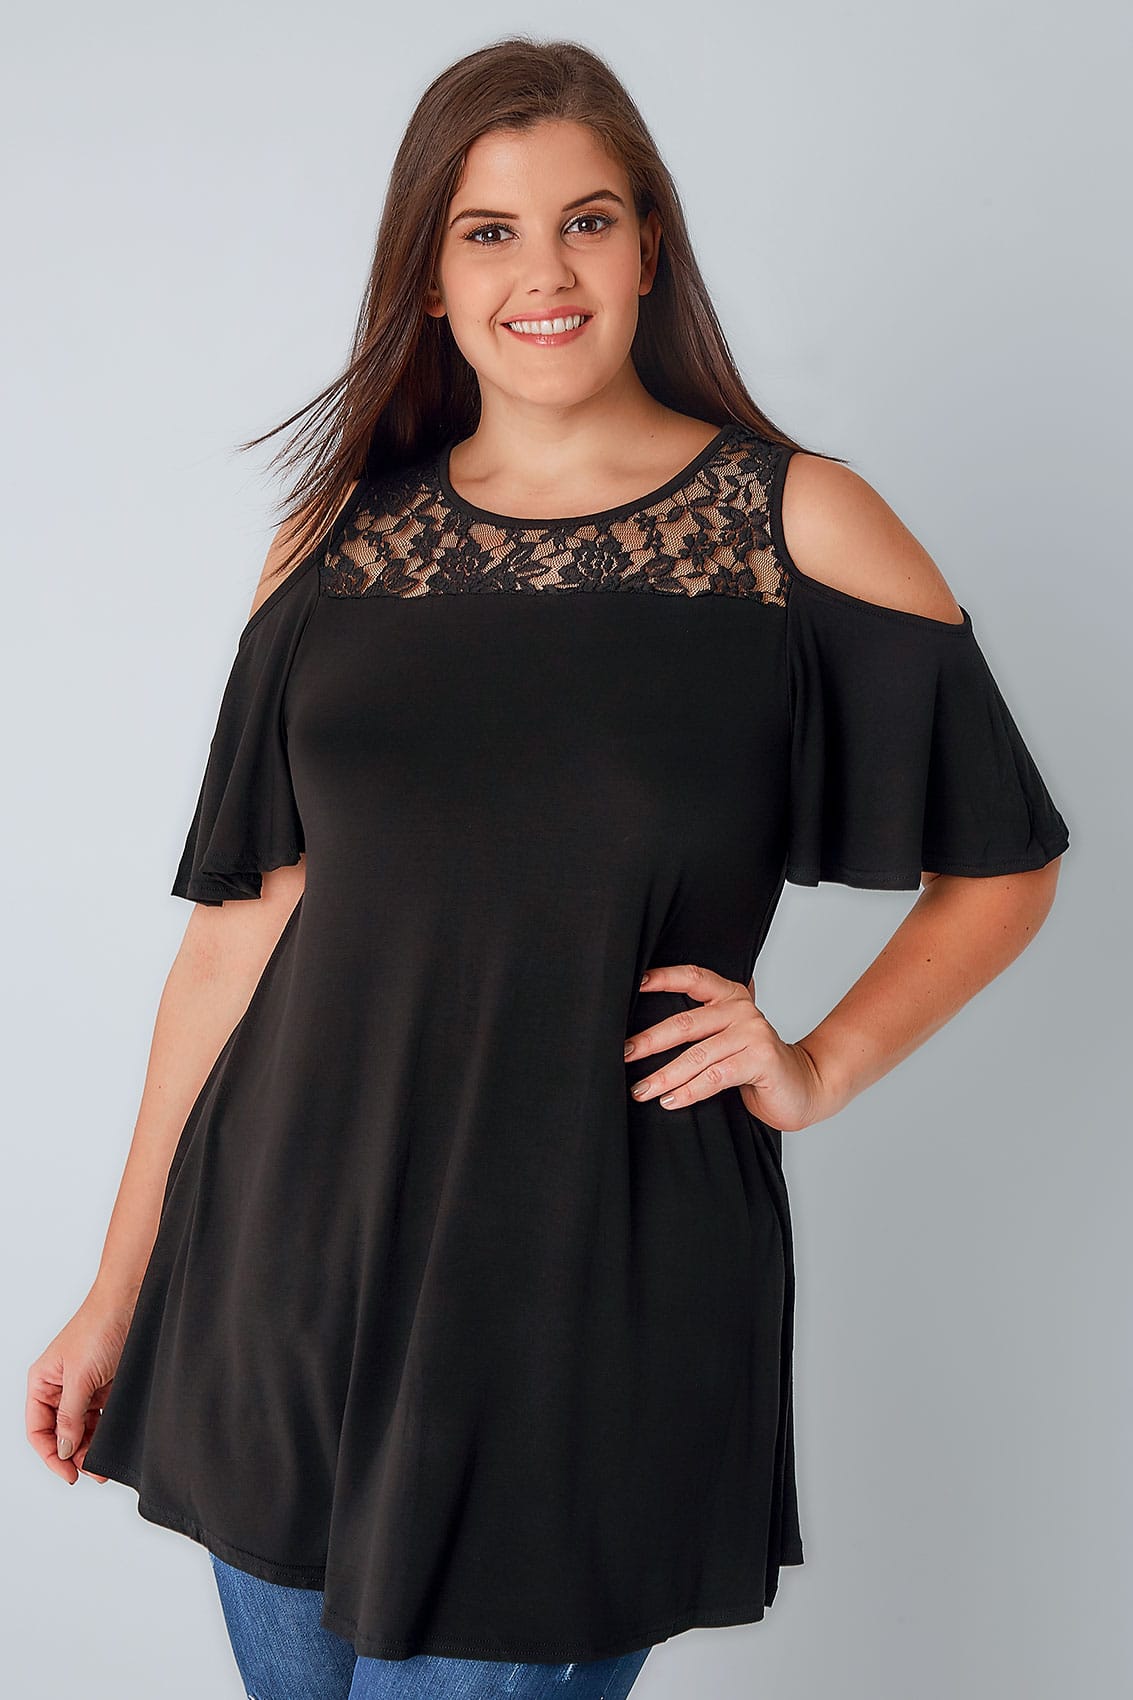 Black Cold Shoulder Longline Jersey Top With Lace Panel, Plus size 16 to 36